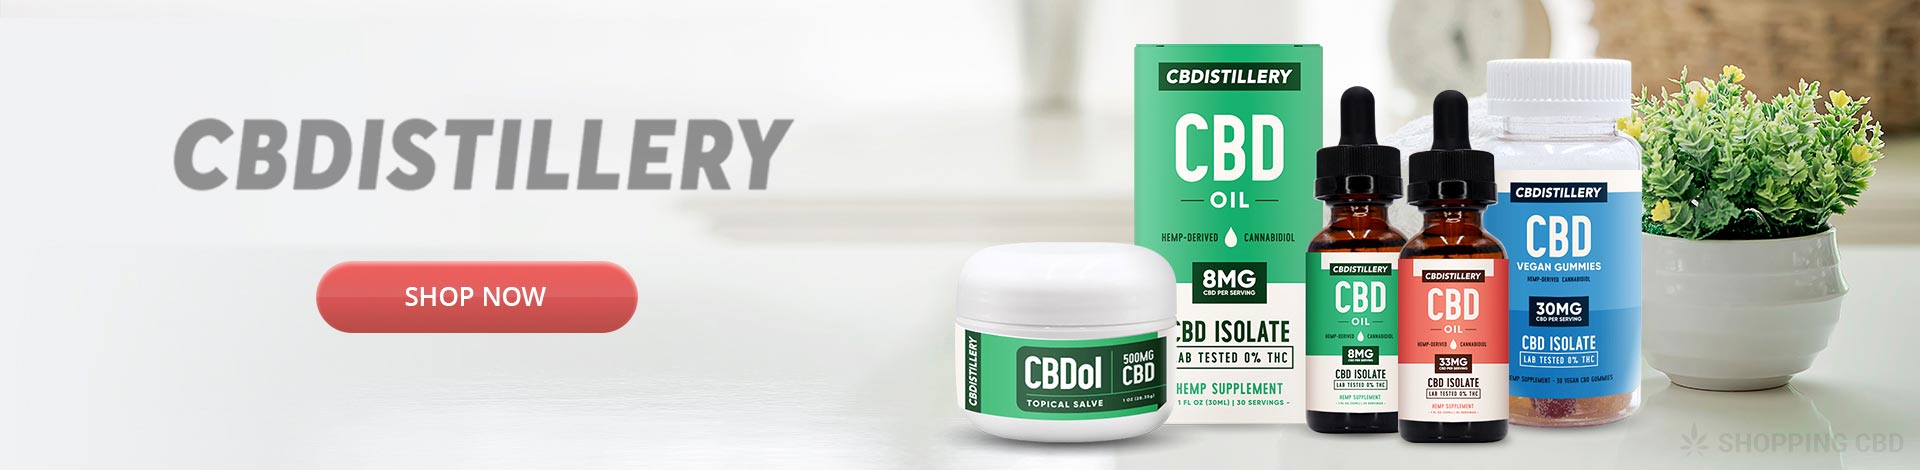 CBDistillery Oil Review: Benefits, Coupons and Usages